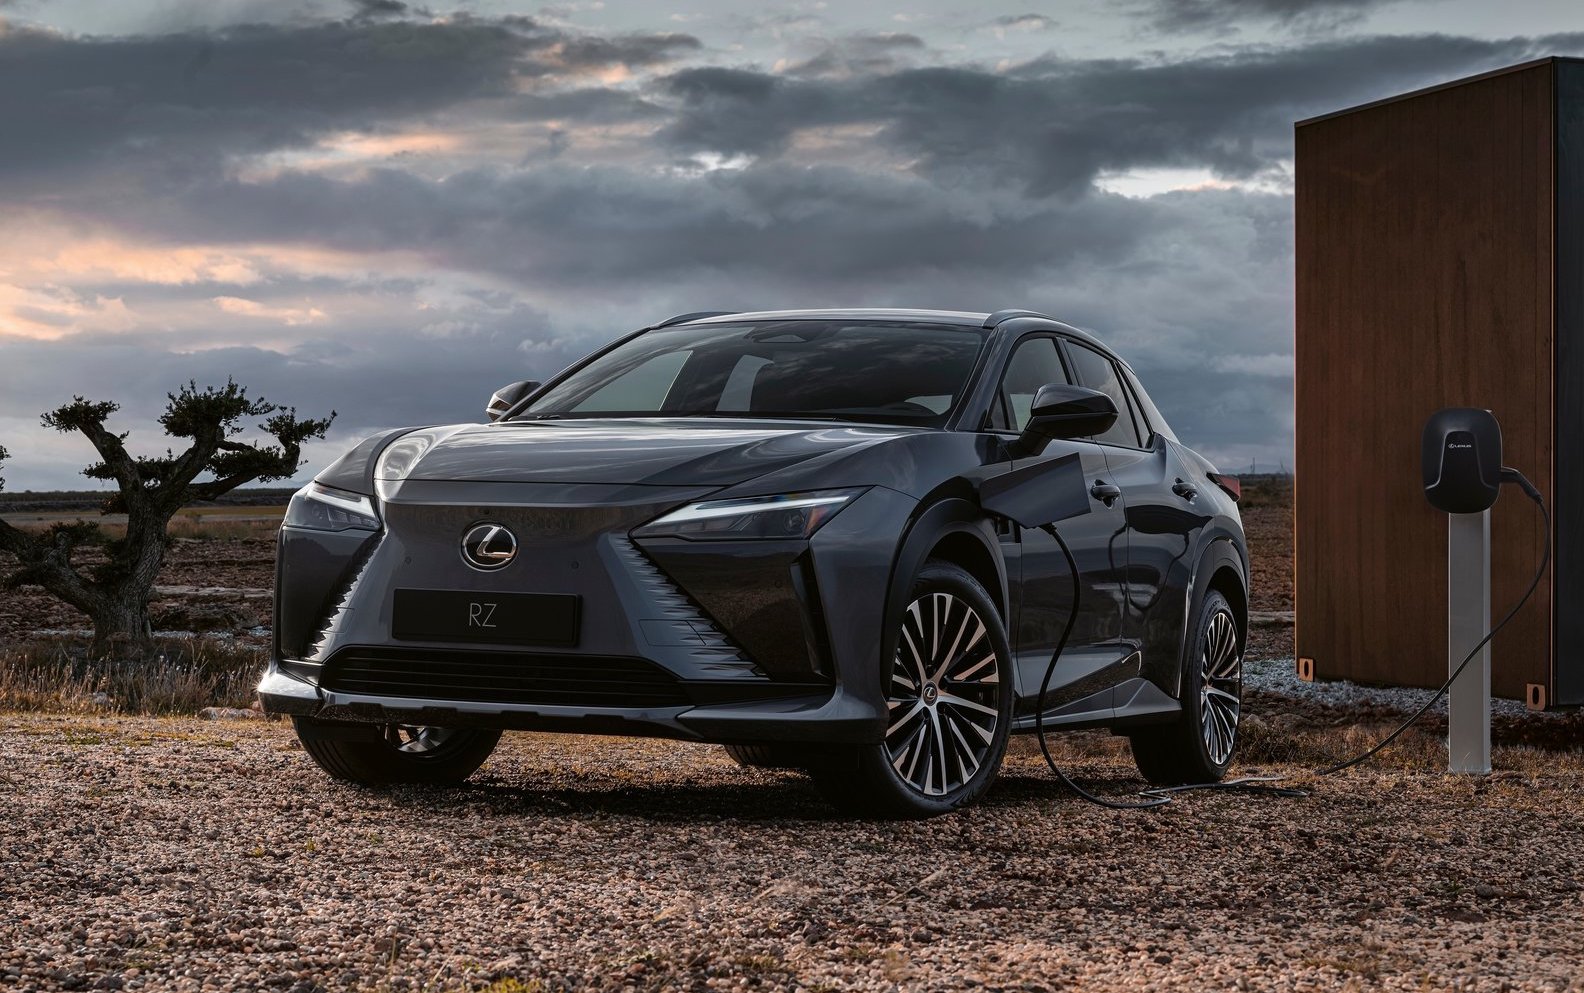 Lexus reveals its first dedicated electric vehicle, the RZ 450e